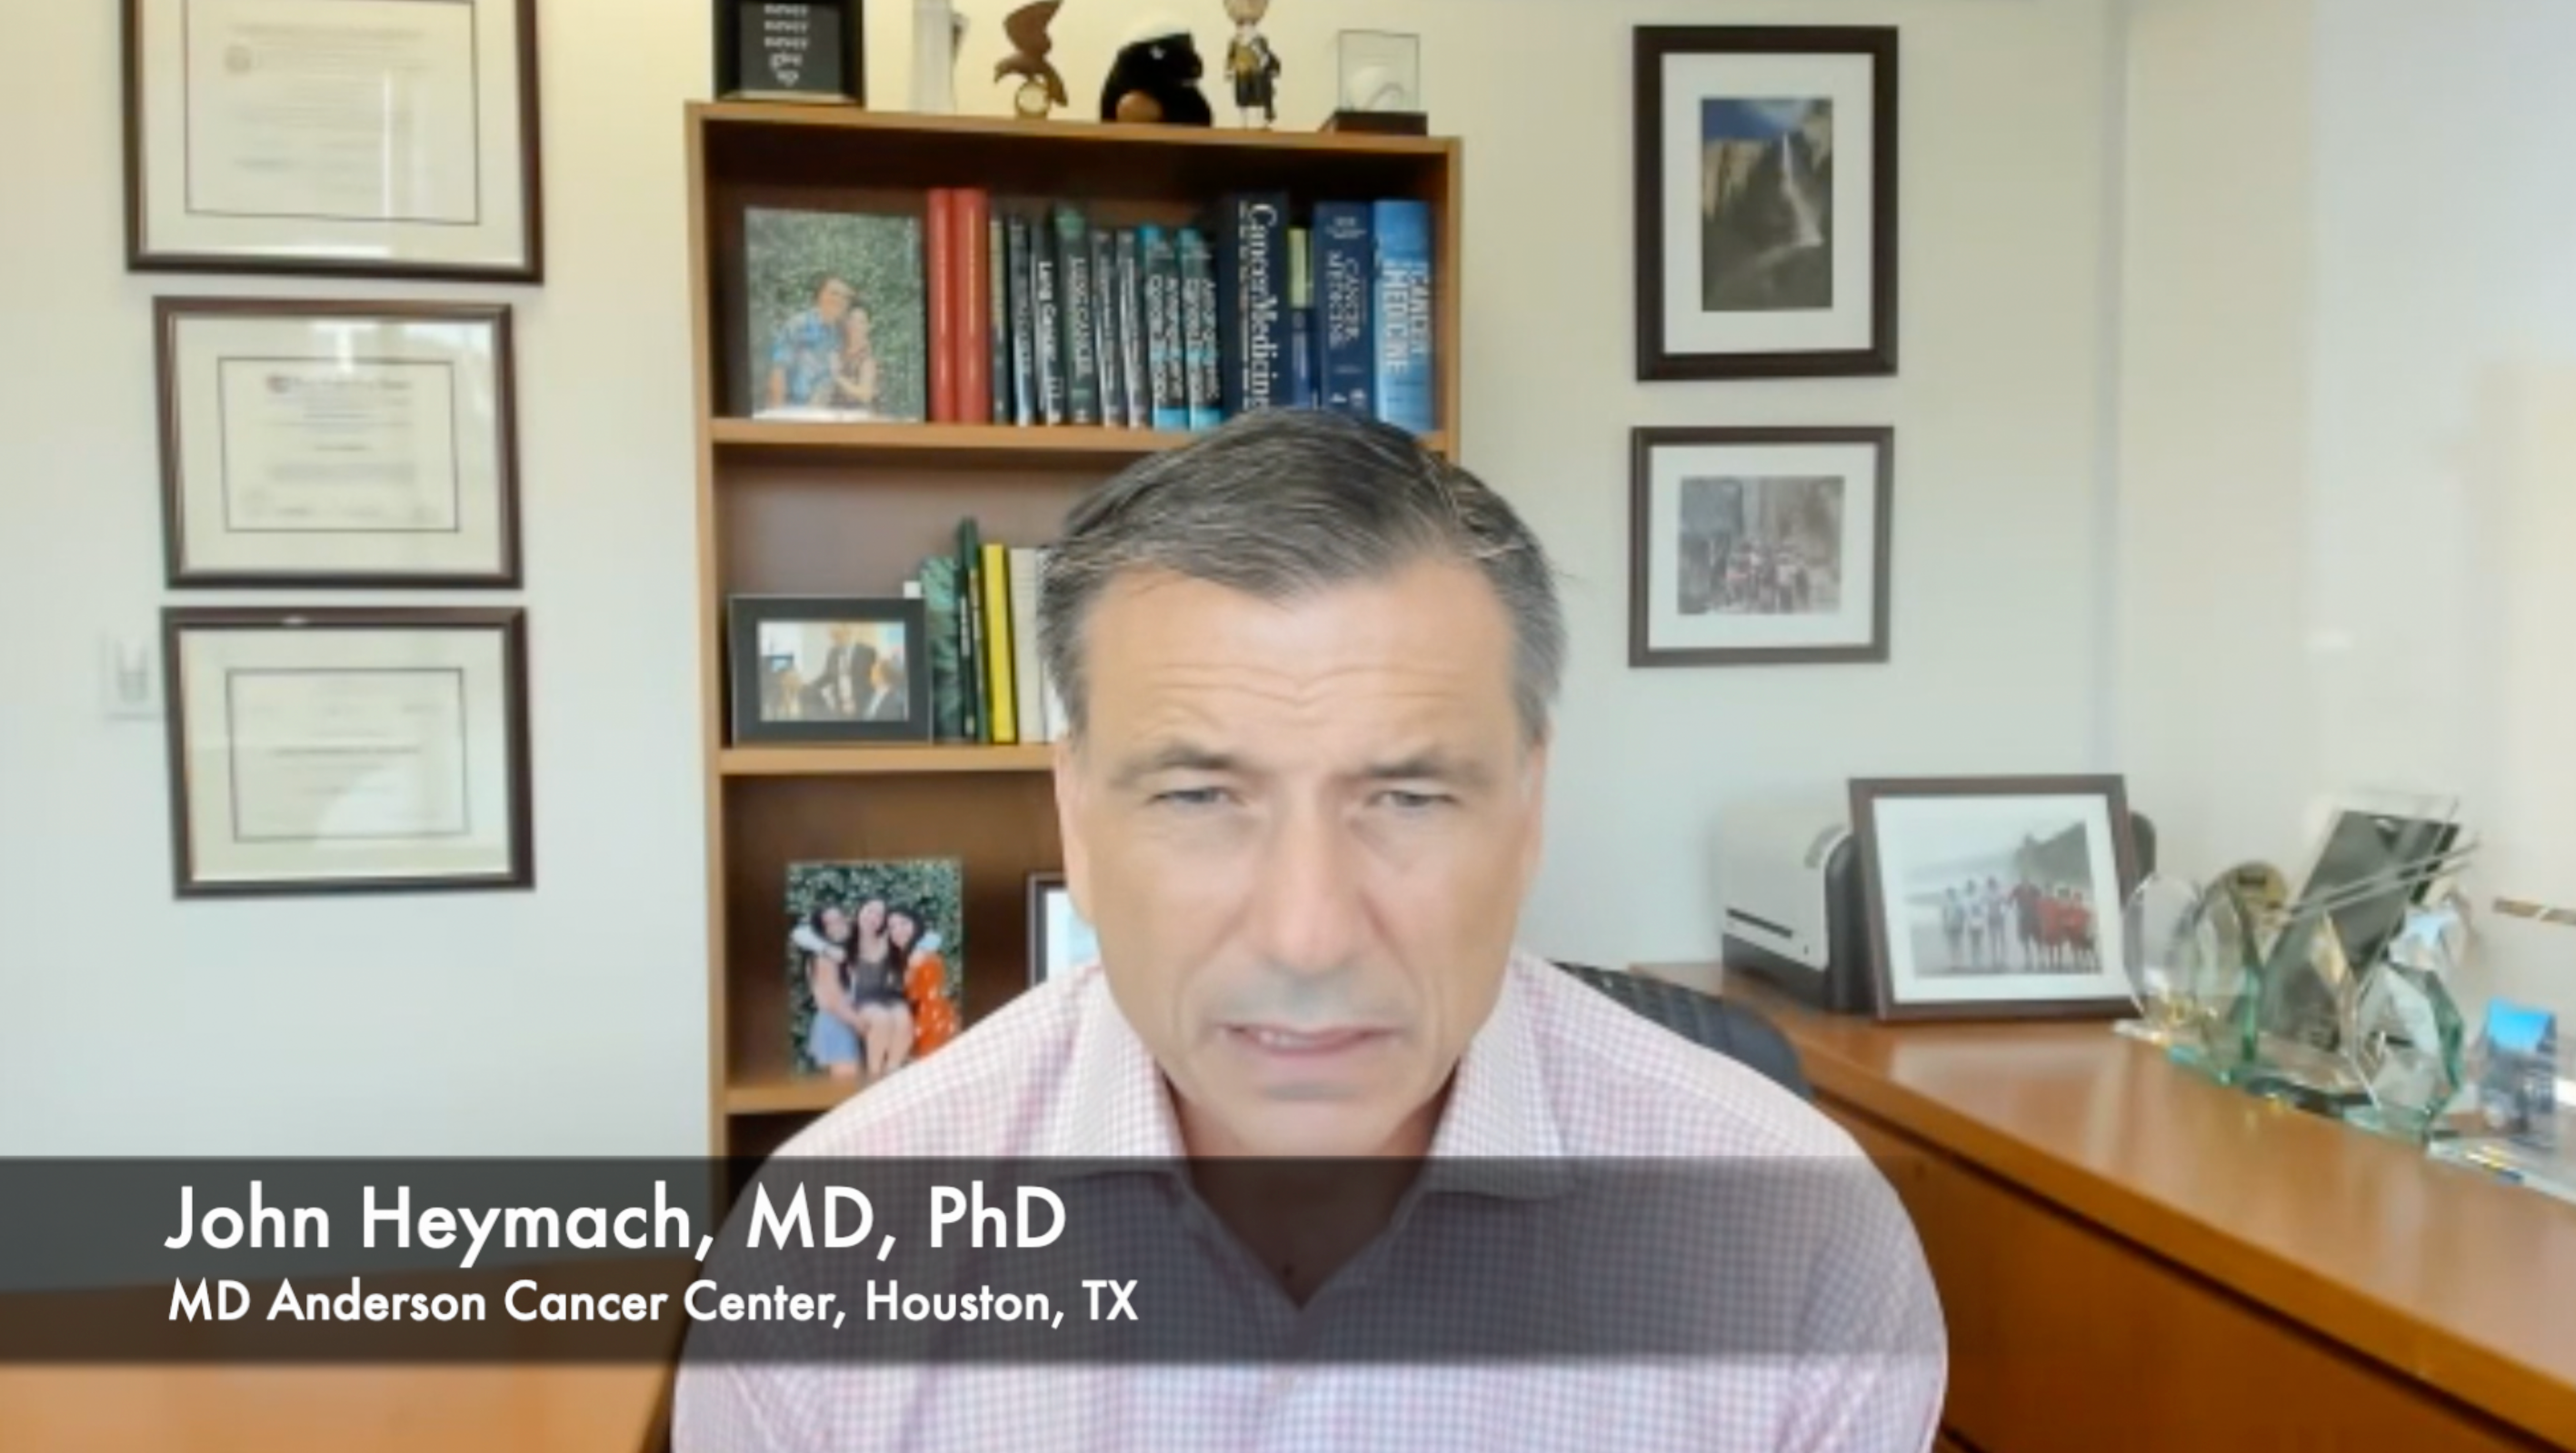 John Heymach, MD, PhD, Discusses the Use of Adjuvant Immunotherapy for Patients With NSCLC 